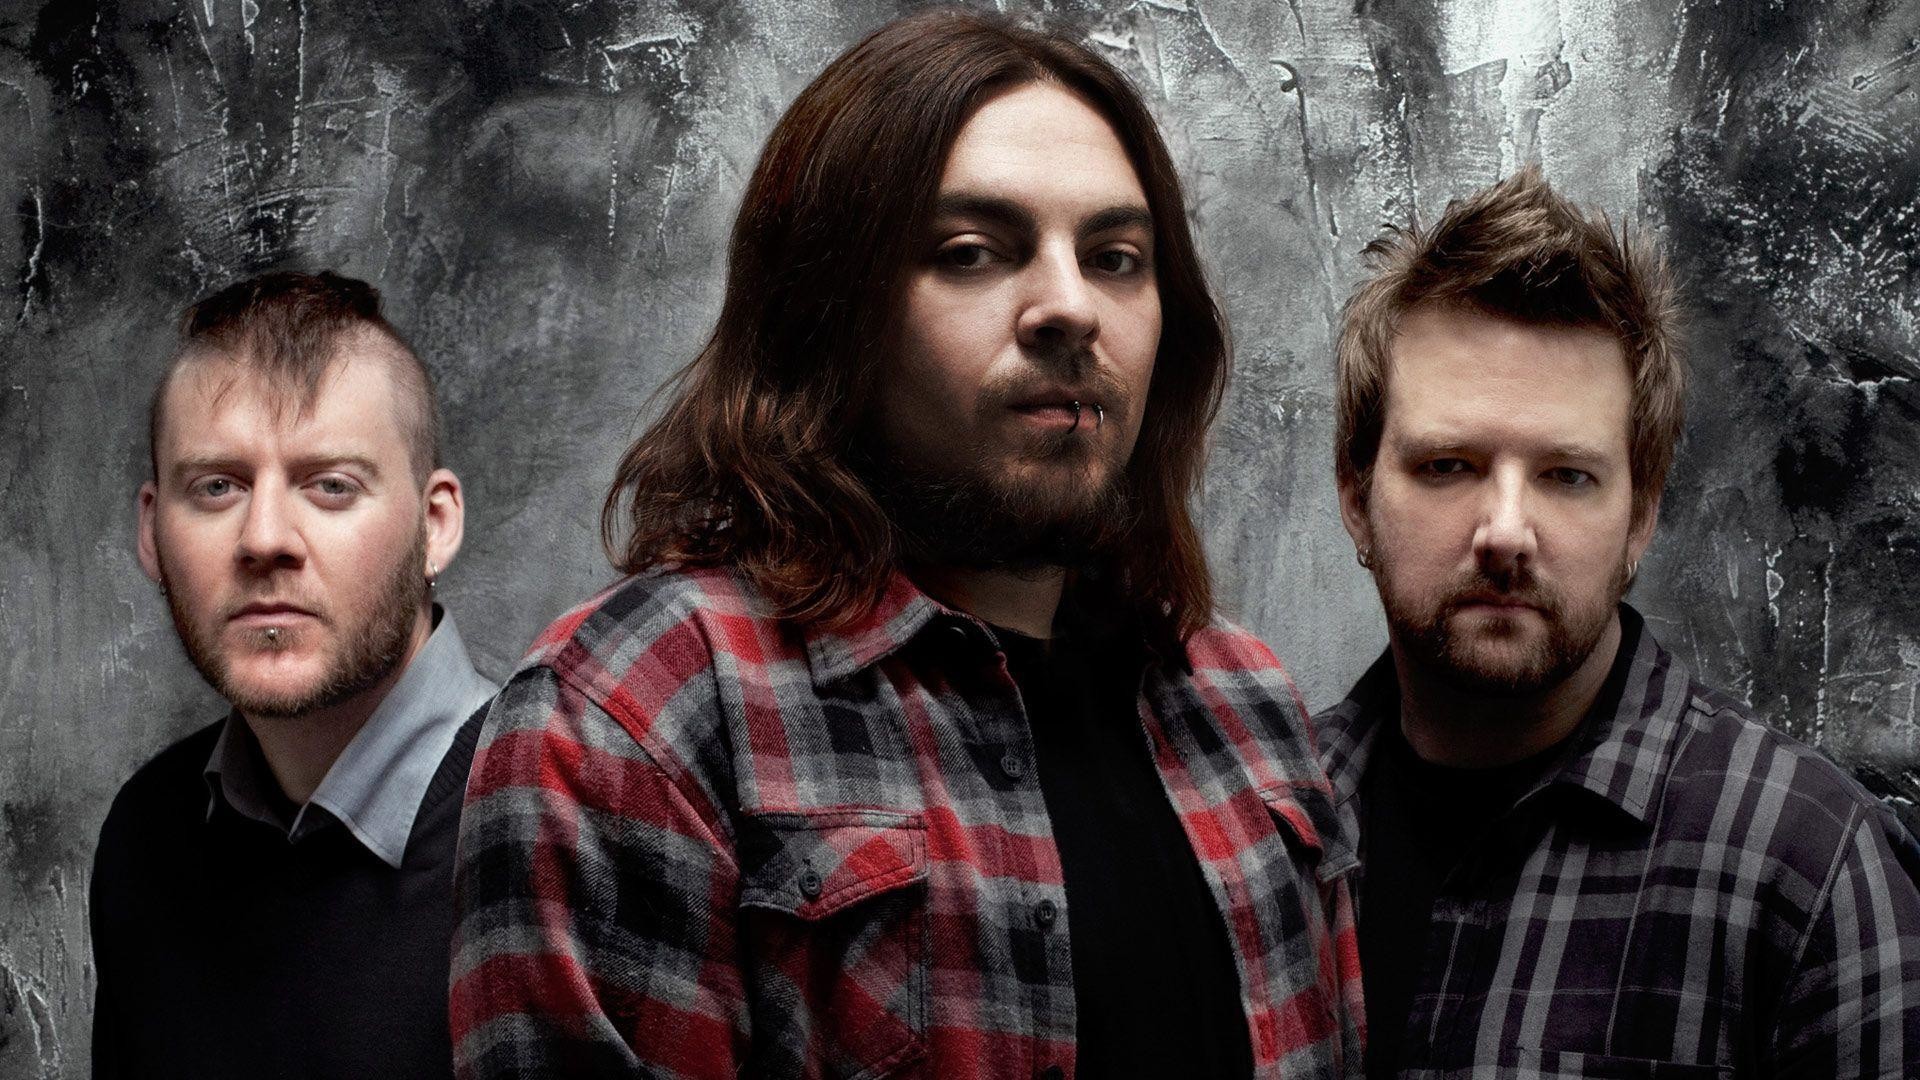 1920x1080 7 Seether Wallpapers | Seether Backgrounds